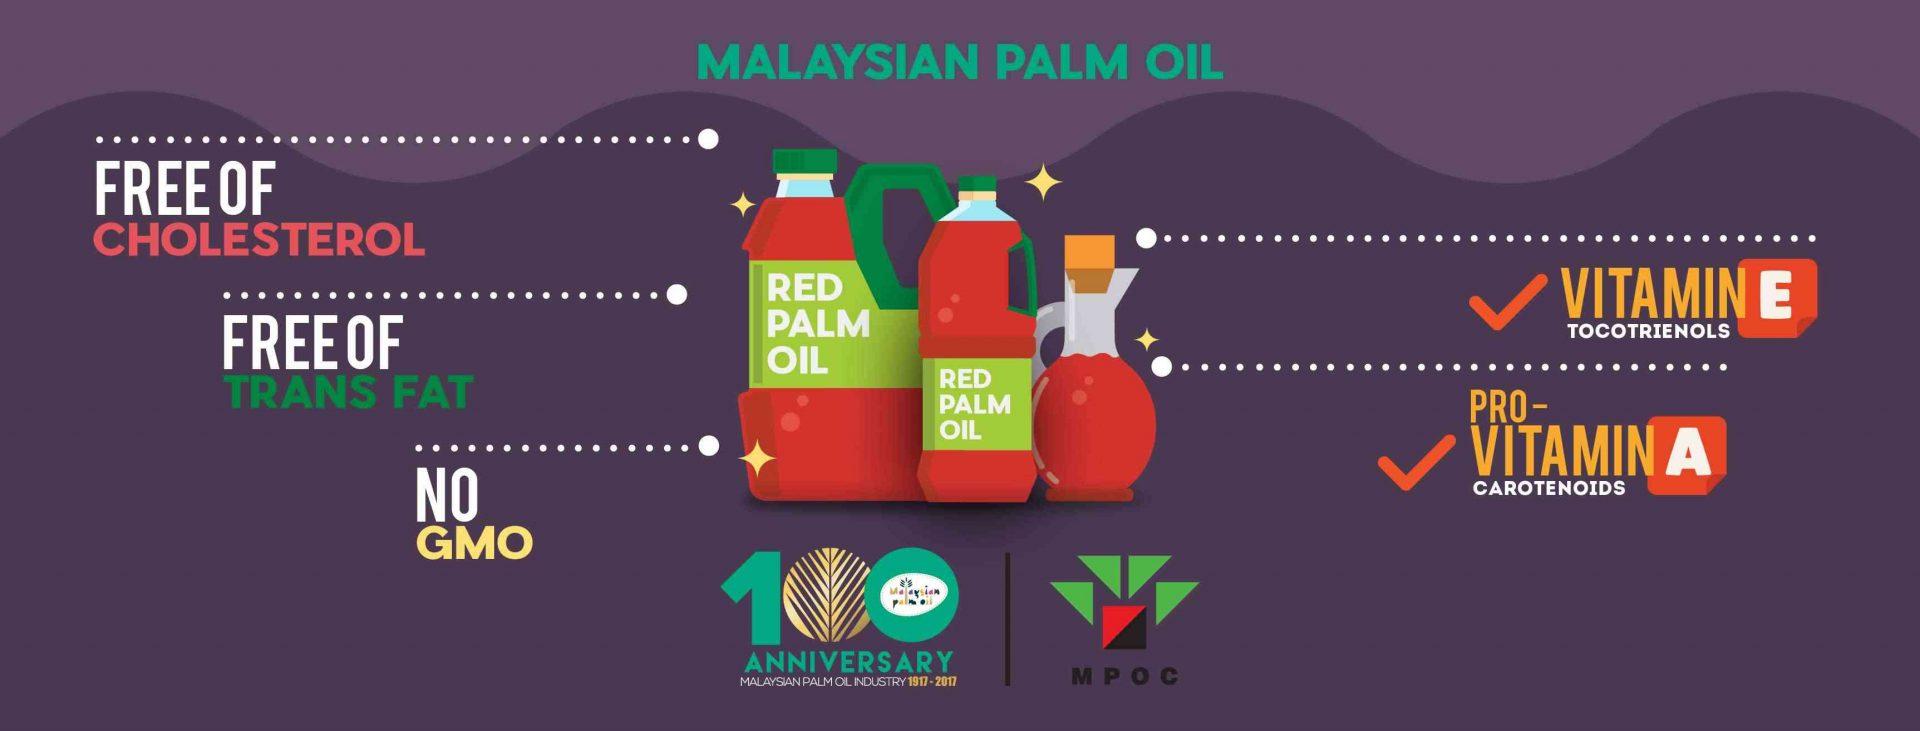 cooking-healthier-using-palm-oil